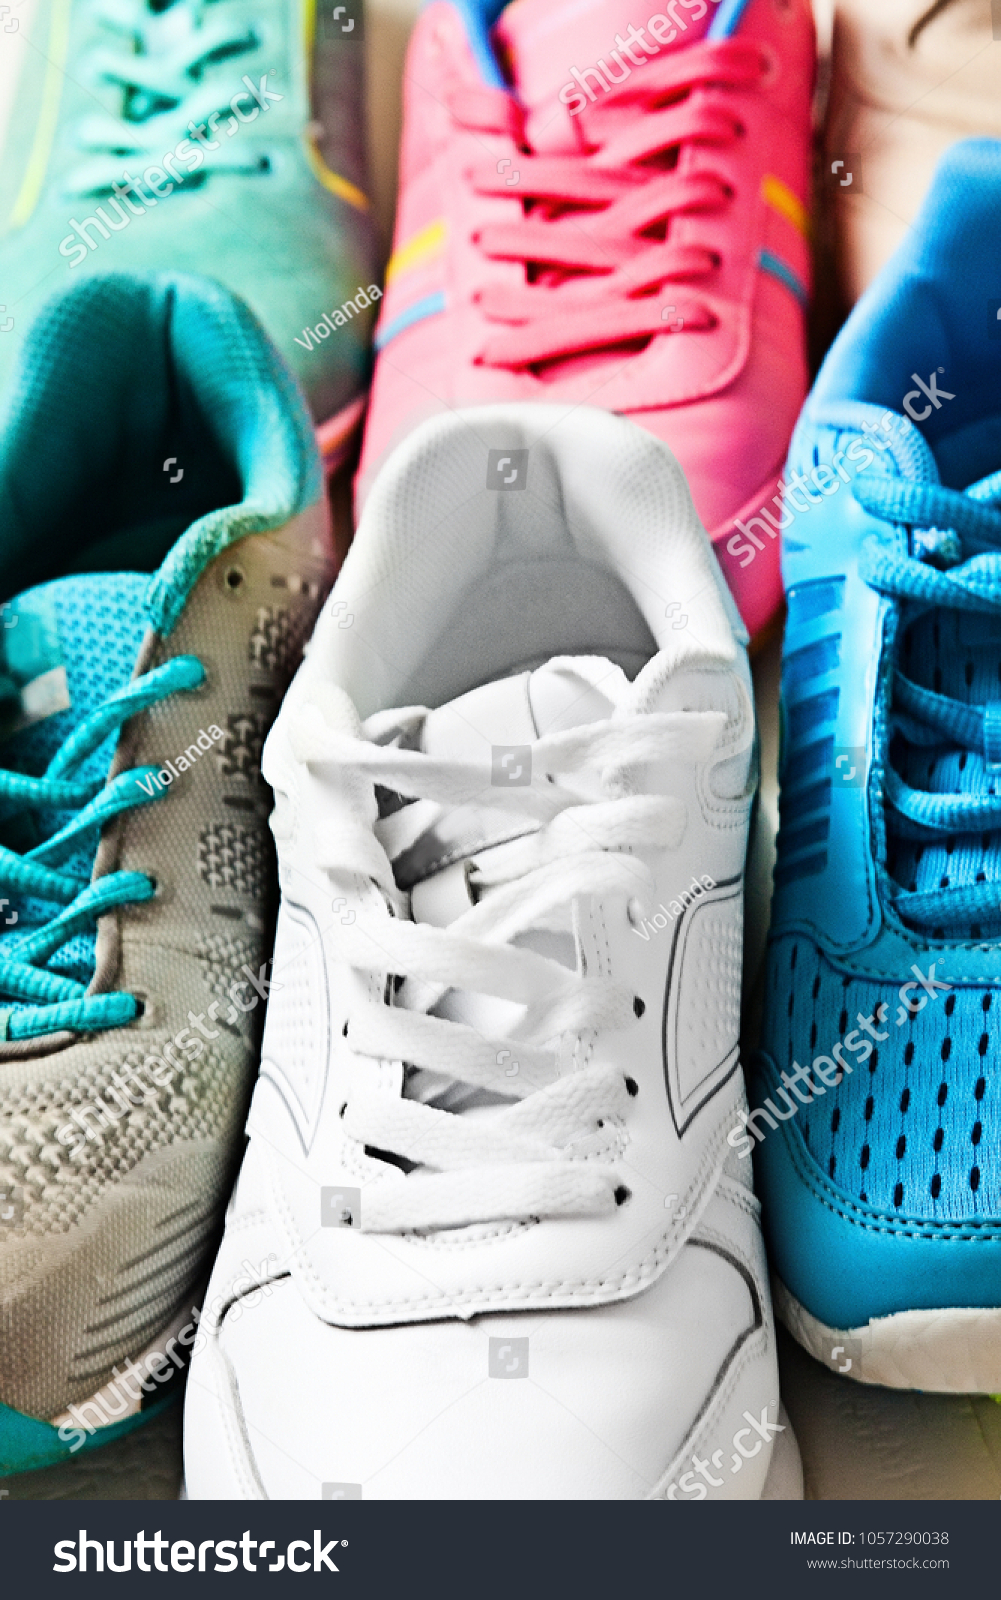 shoes that look both pink and white and blue and gray